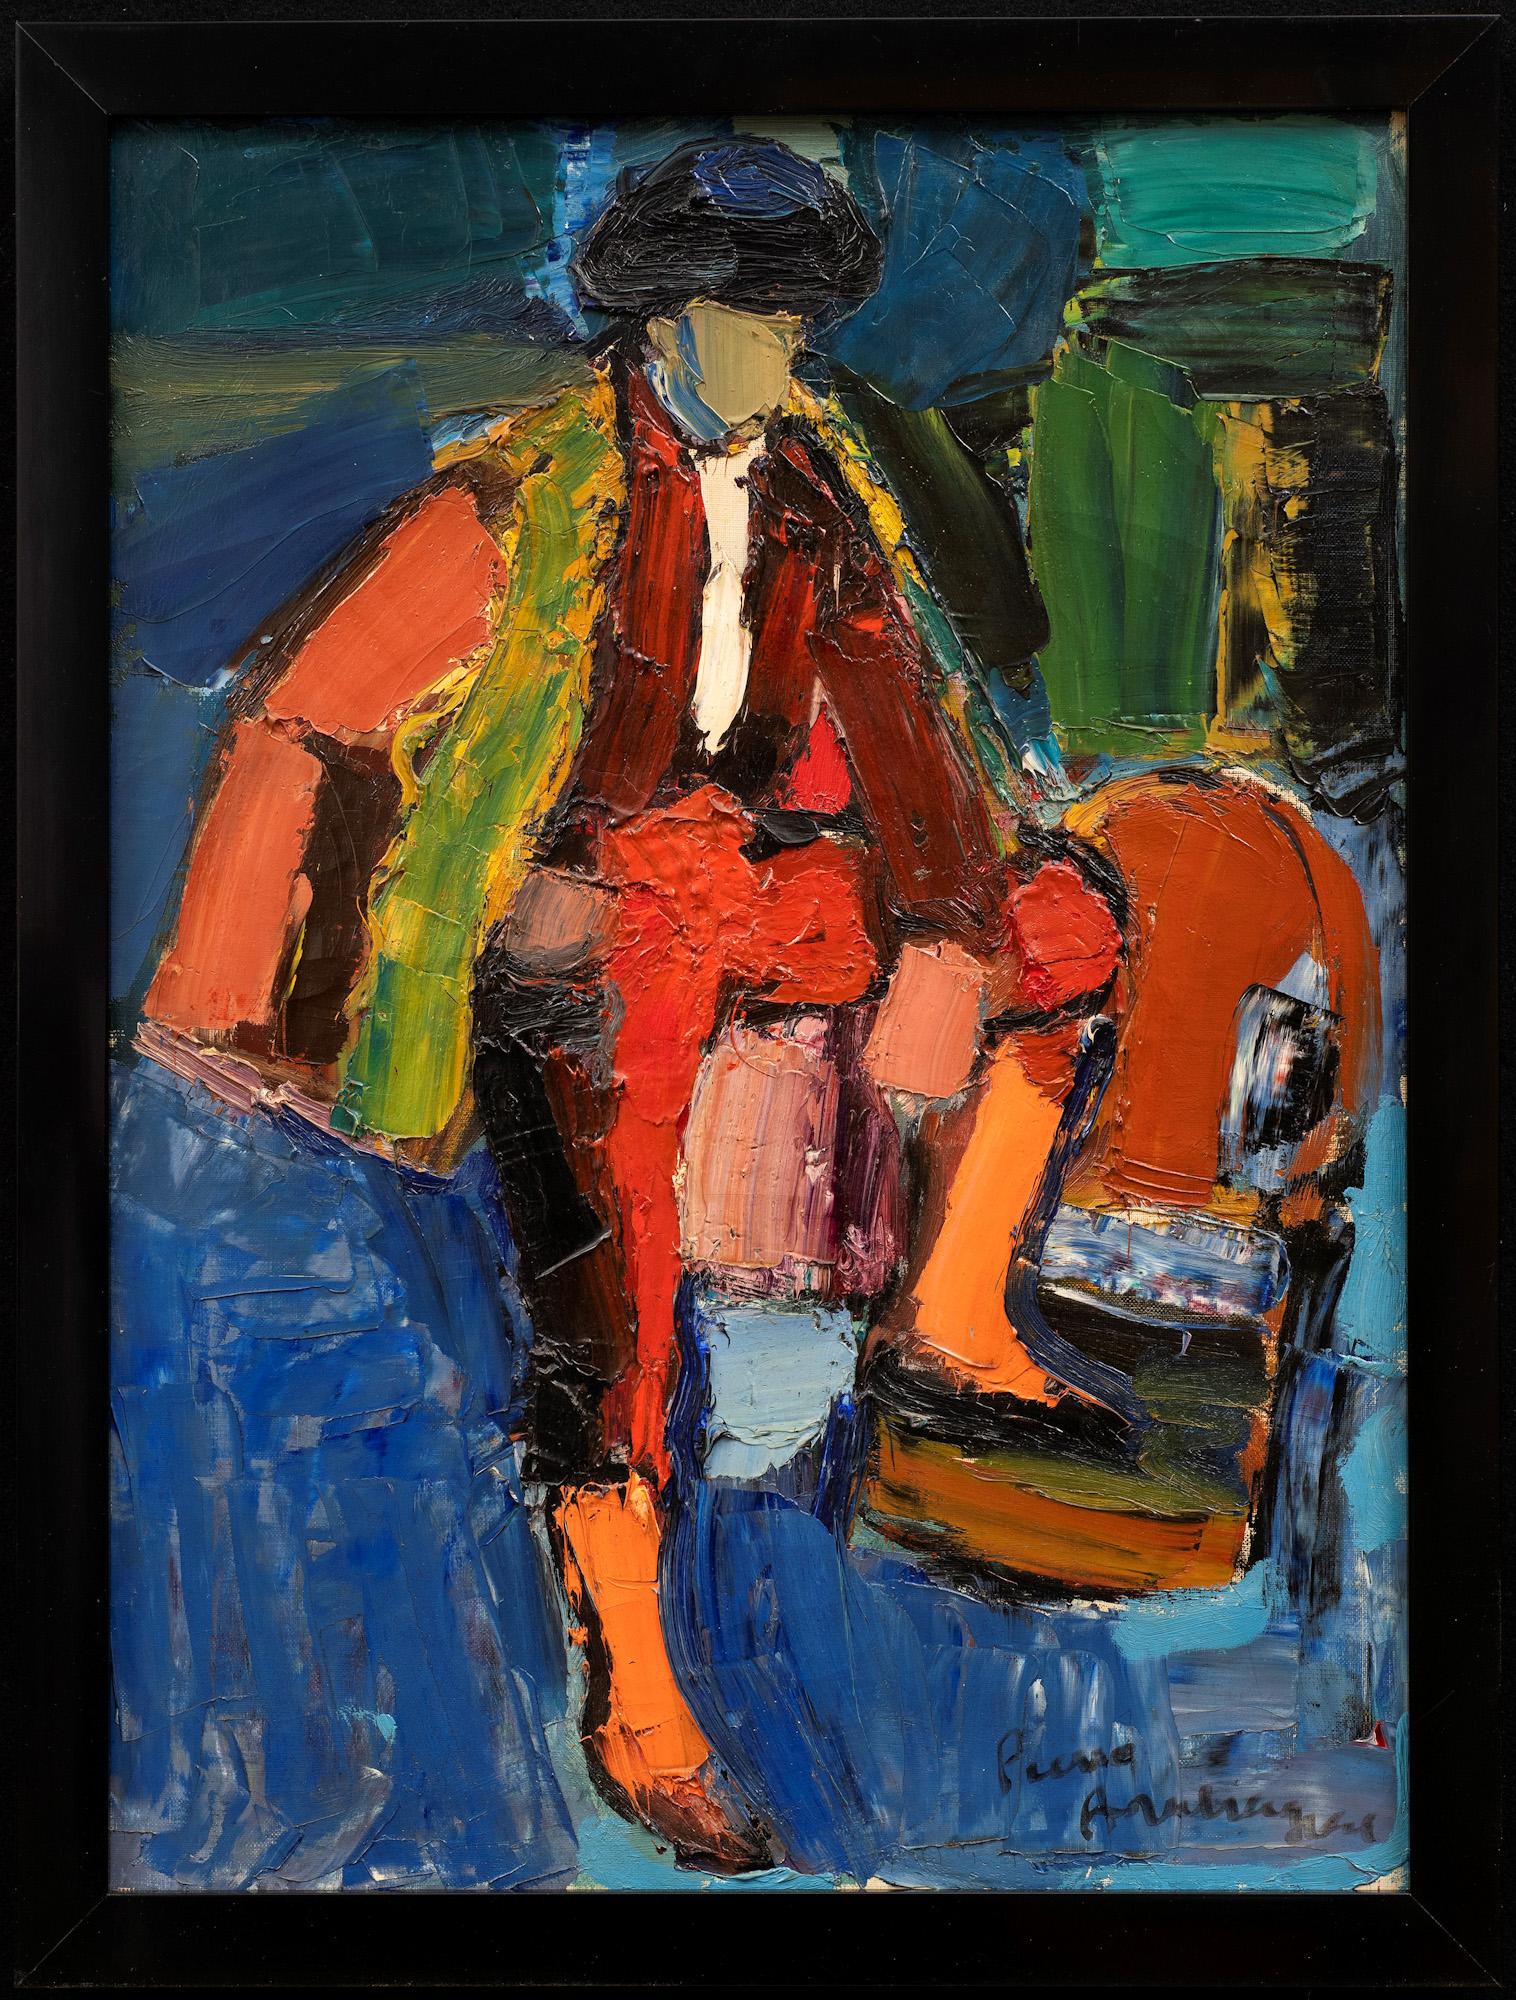 "El Torero-The Bullfighter" 
Pierre Ambrogiani (France, 1905-1985)
Oil on canvas
Circa 1950's 
28 1/4 x 20 3/4 (31 1/4 x 23 3/4 frame) inches

"If Diego Velázquez and Henri Matisse had a baby...."

Self-taught artist from a very young age,